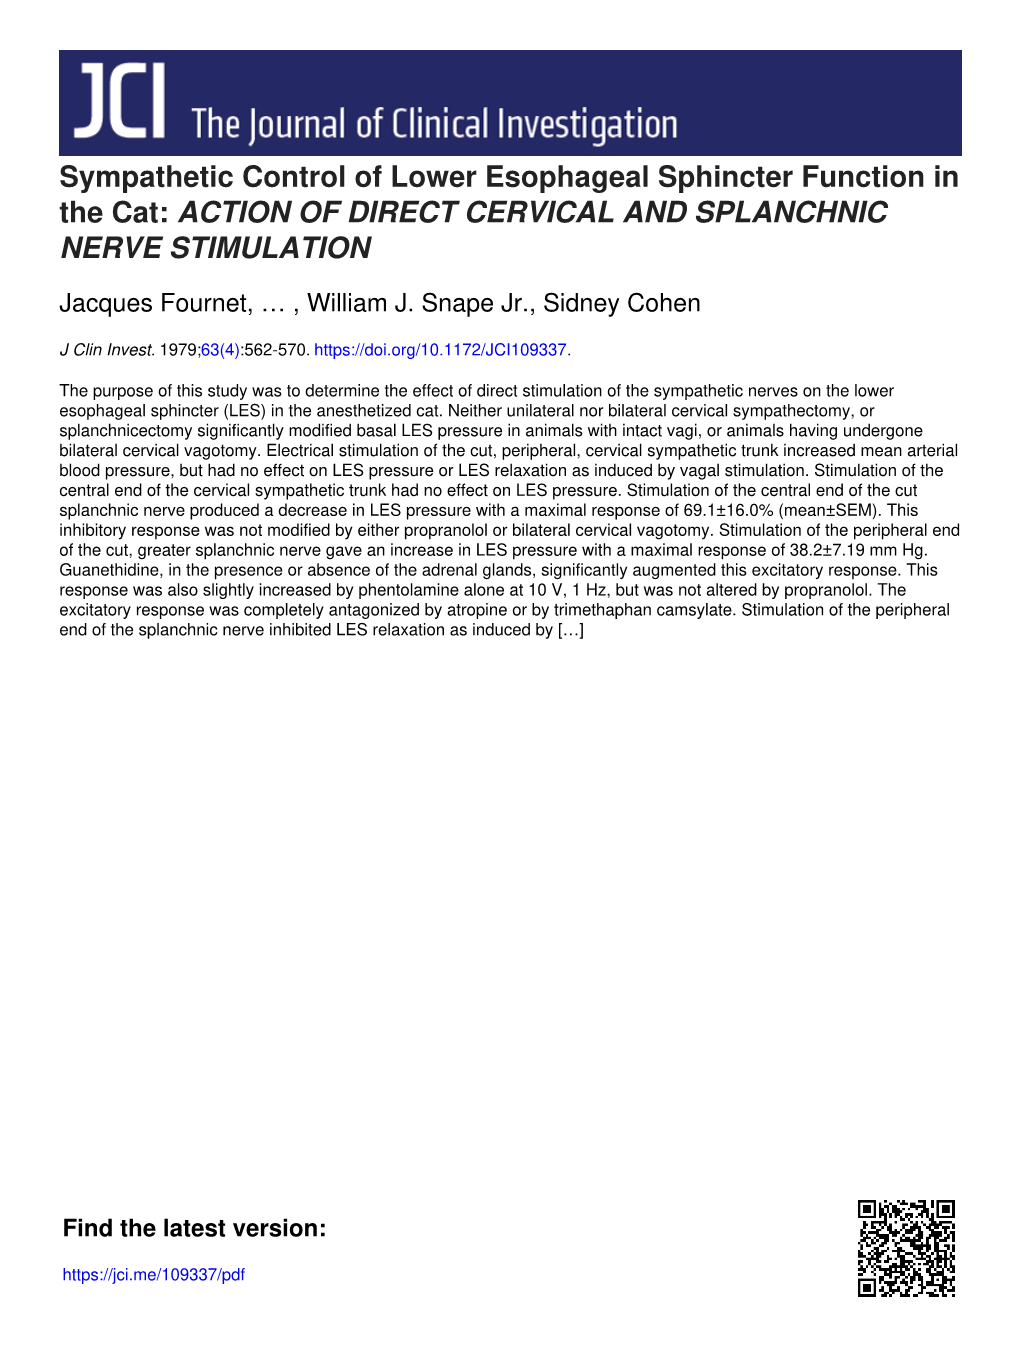 Sympathetic Control of Lower Esophageal Sphincter Function in the Cat: ACTION of DIRECT CERVICAL and SPLANCHNIC NERVE STIMULATION